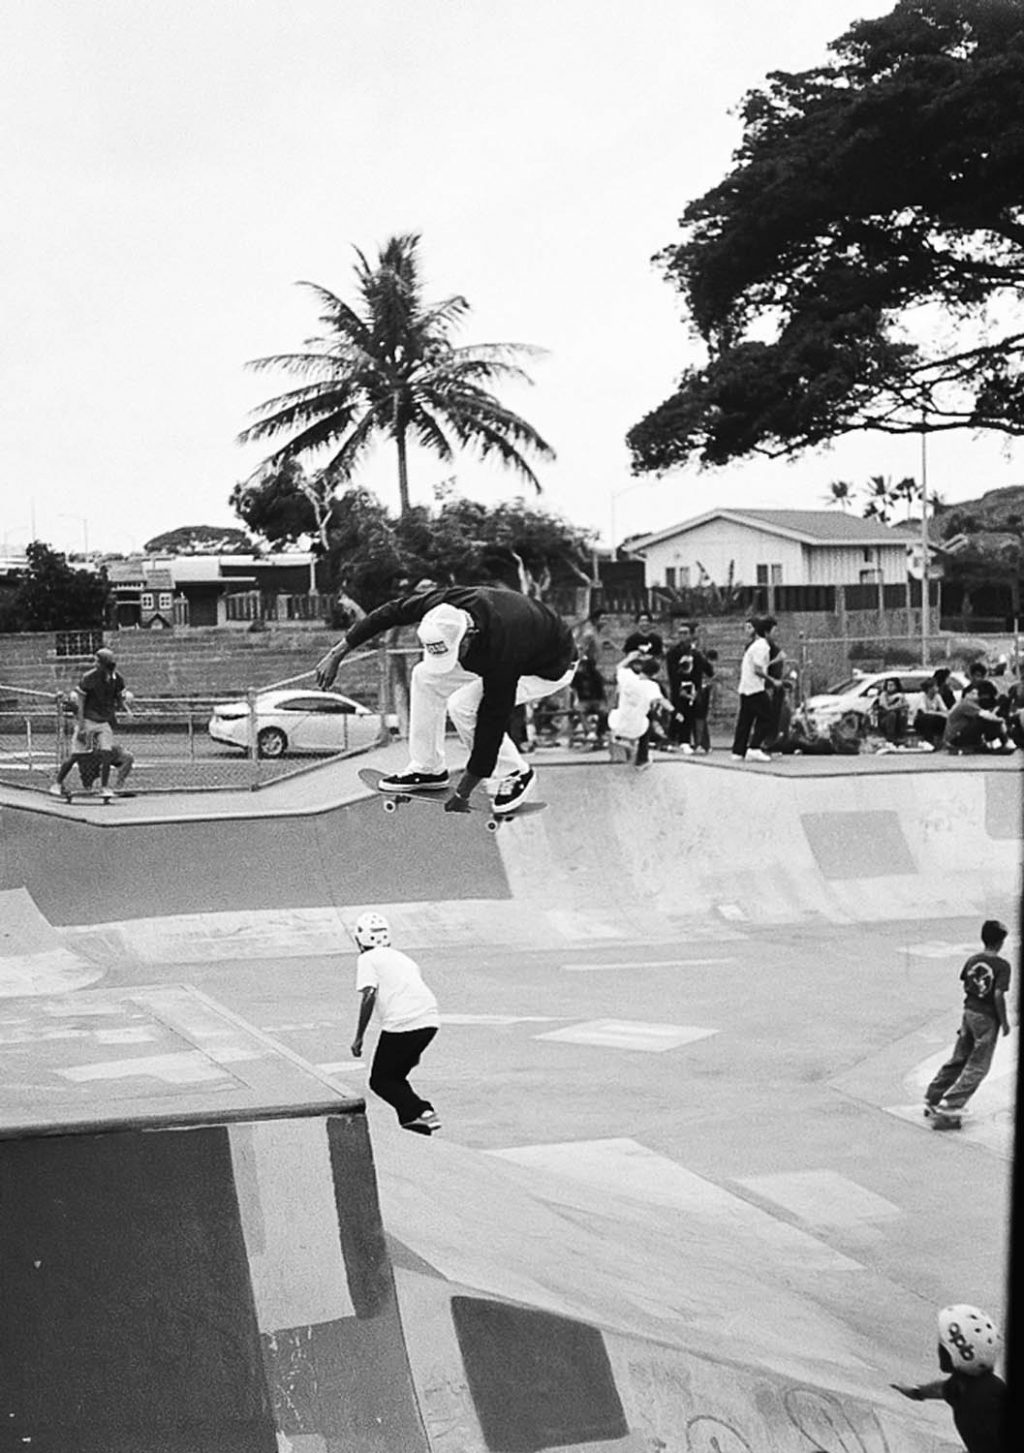 This was my first time shooting Ortho Plus. I shot it at ISO 100 on my Olympus PenFT at the RVCA Skate event in Hawaii.